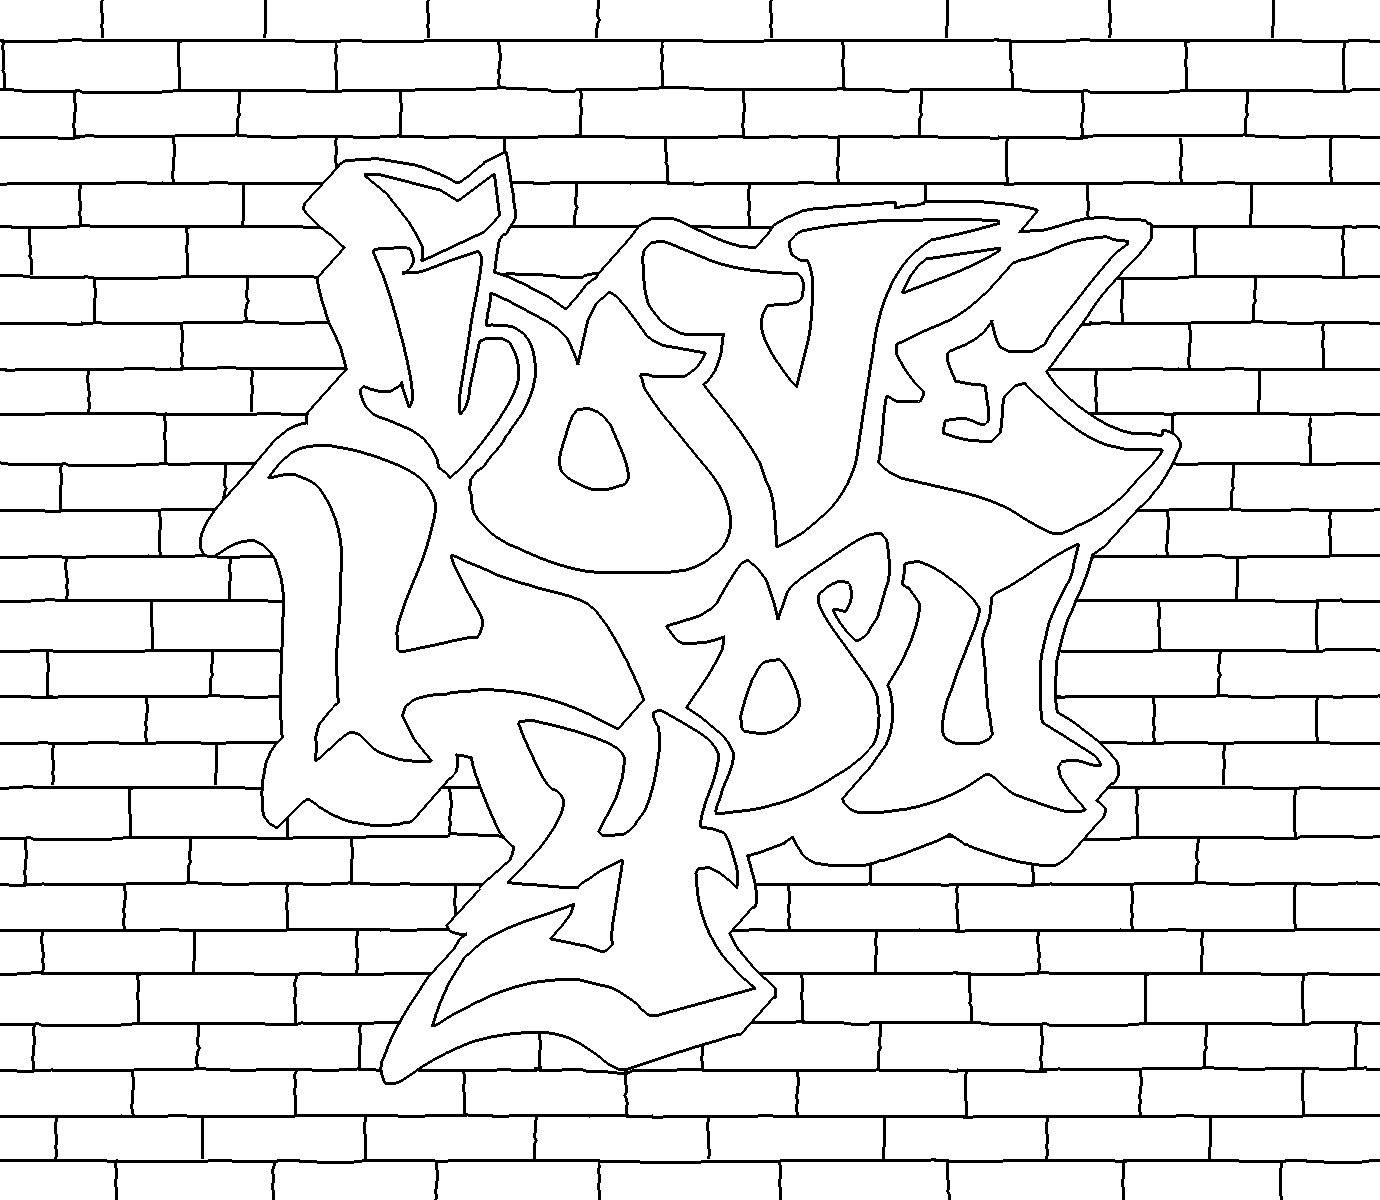 coloring-pages-for-teenagers-graffiti-boringpop